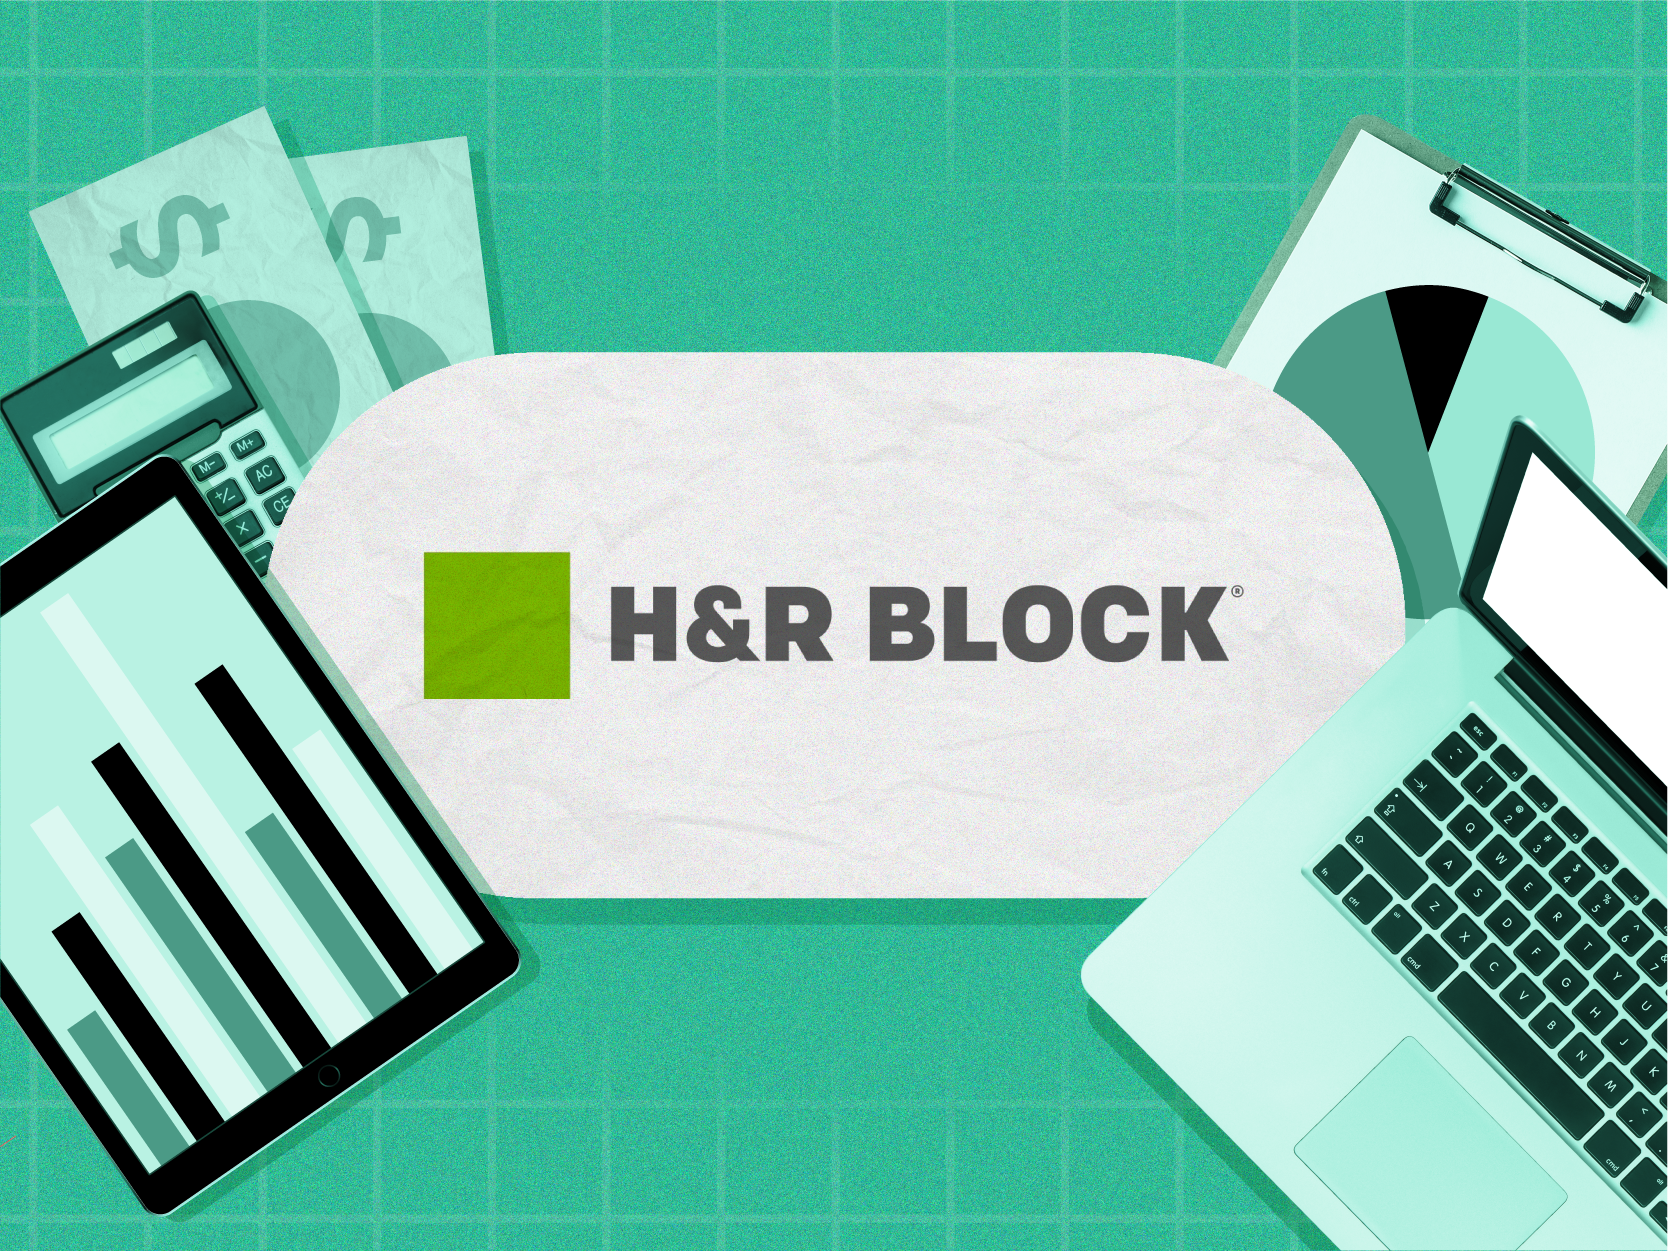 How great does H&R Block charge? That is how great you may perchance per chance pay to prepare and file your tax return.